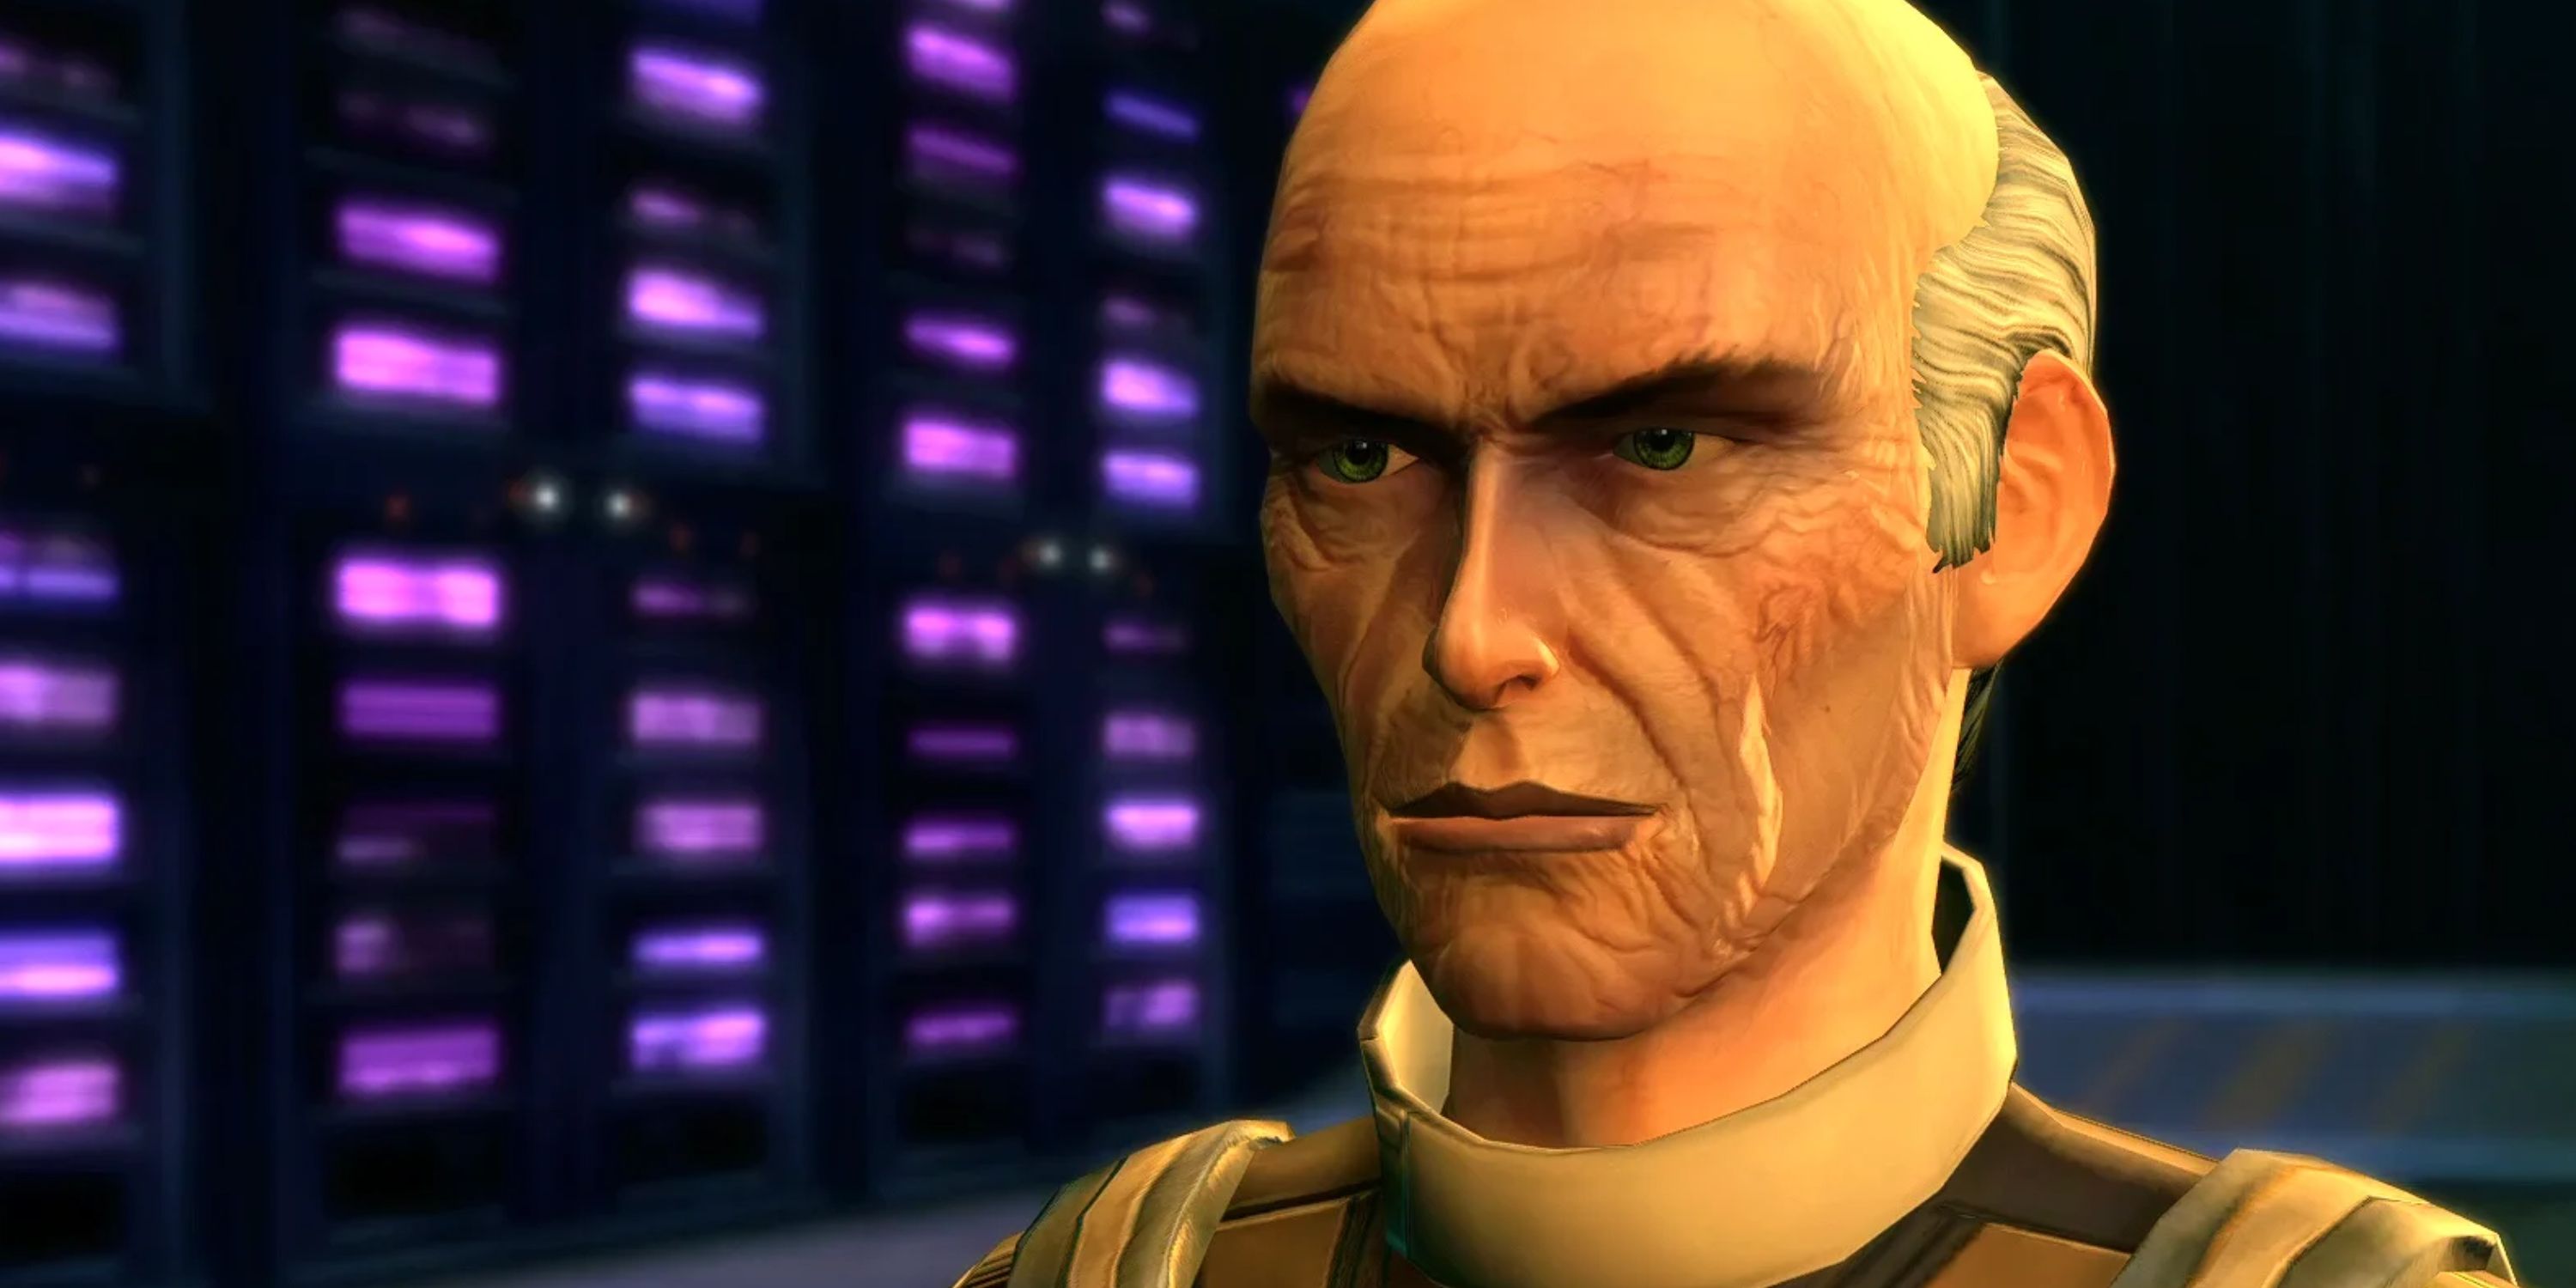 The Republic scientist Nasan Godera, from Star Wars: The Old Republic